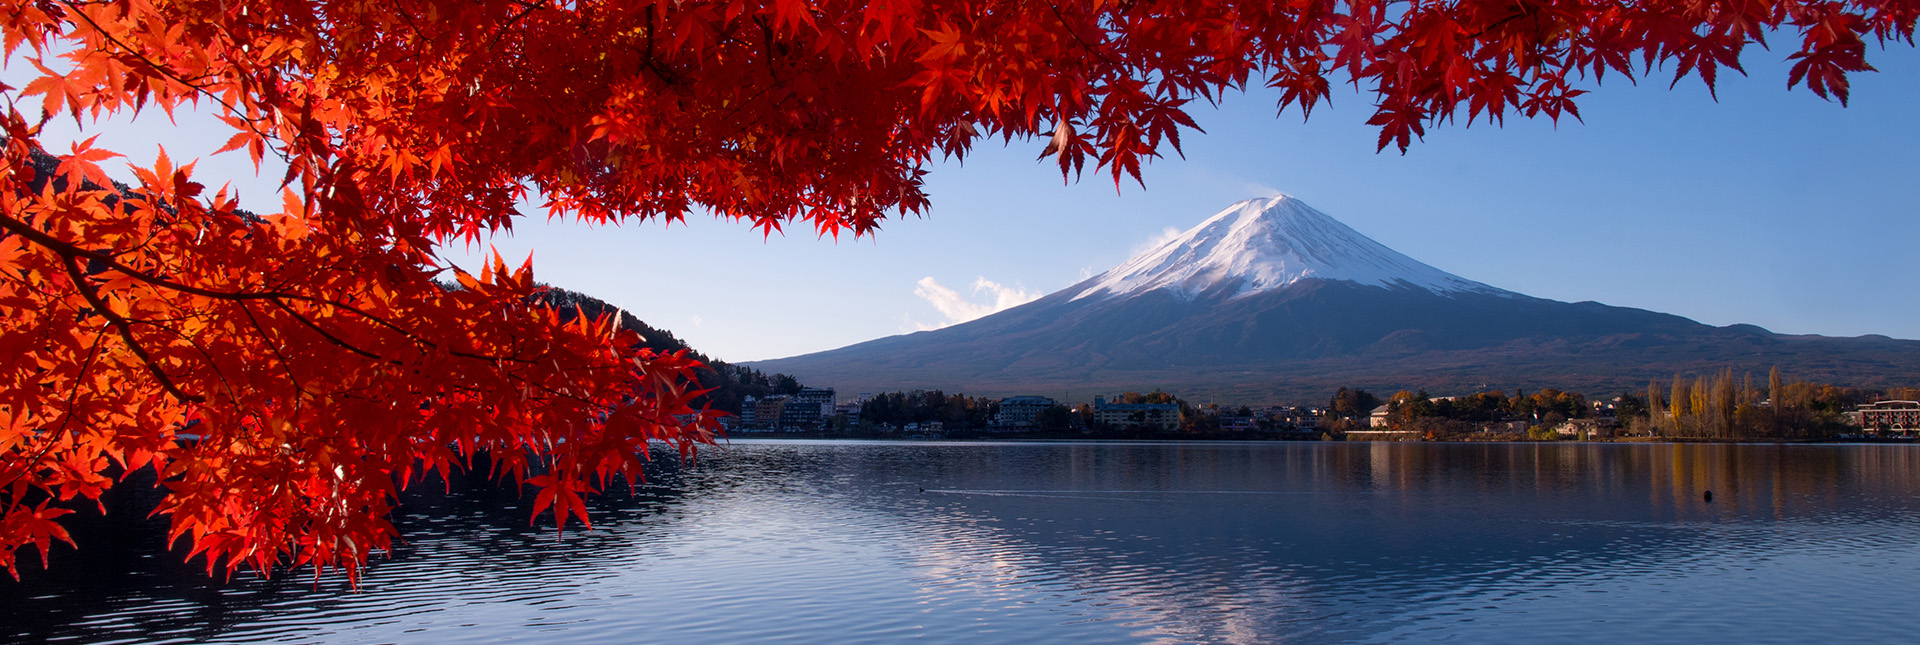 Colorful Autumn Season and Mountain Fuji Japan with morning fog and red leaves